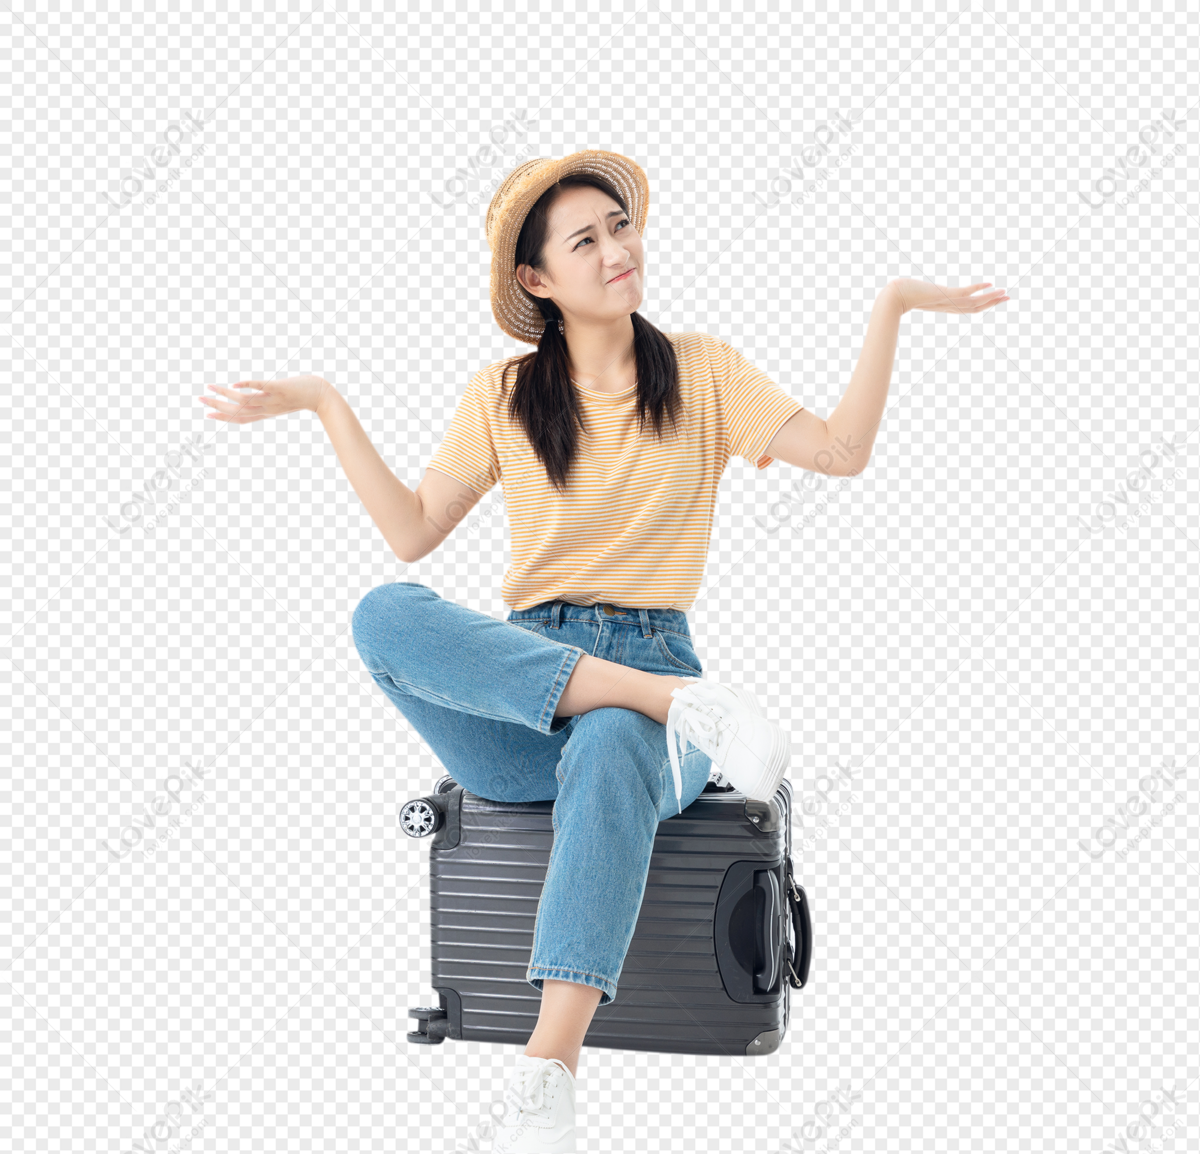 Cute teenage girl traveling, young, funny, youth png image